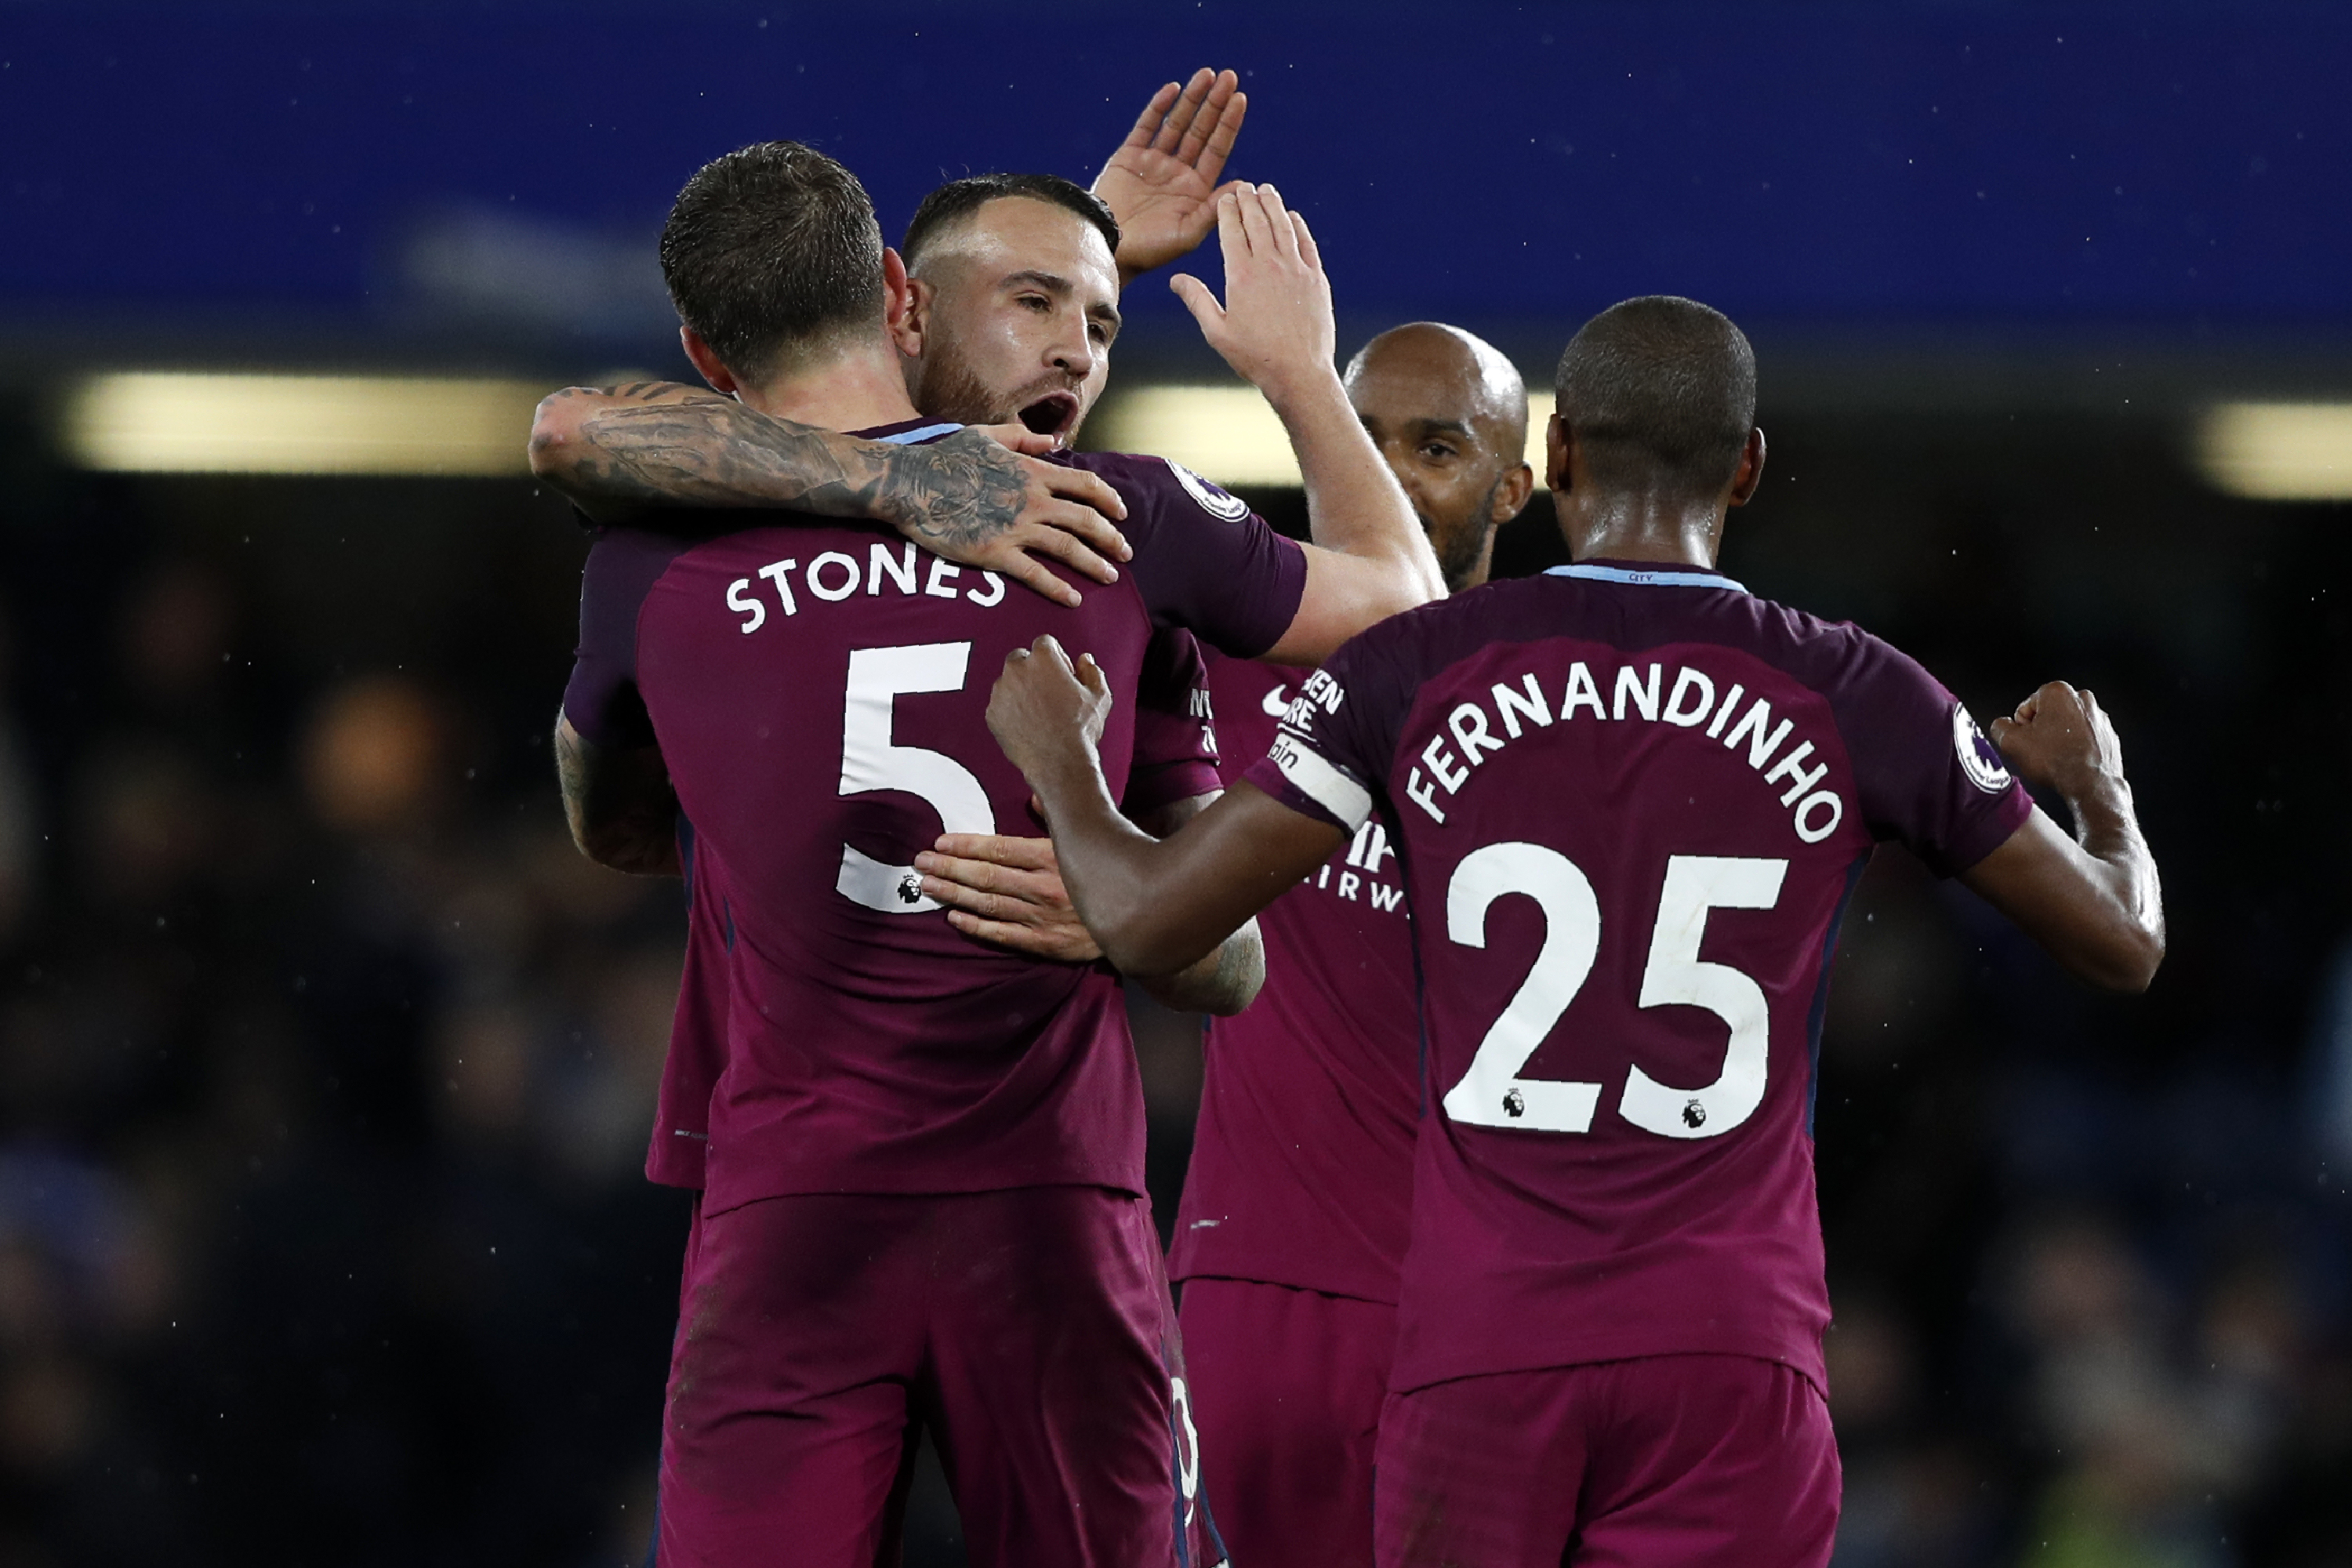 Manchester City's players celebrate on the pitch after during the English Premier League football match between Chelsea and Manchester City at Stamford Bridge in London on September 30, 2017.
Manchester City won the game 1-0. / AFP PHOTO / Adrian DENNIS / RESTRICTED TO EDITORIAL USE. No use with unauthorized audio, video, data, fixture lists, club/league logos or 'live' services. Online in-match use limited to 75 images, no video emulation. No use in betting, games or single club/league/player publications.  /         (Photo credit should read ADRIAN DENNIS/AFP/Getty Images)